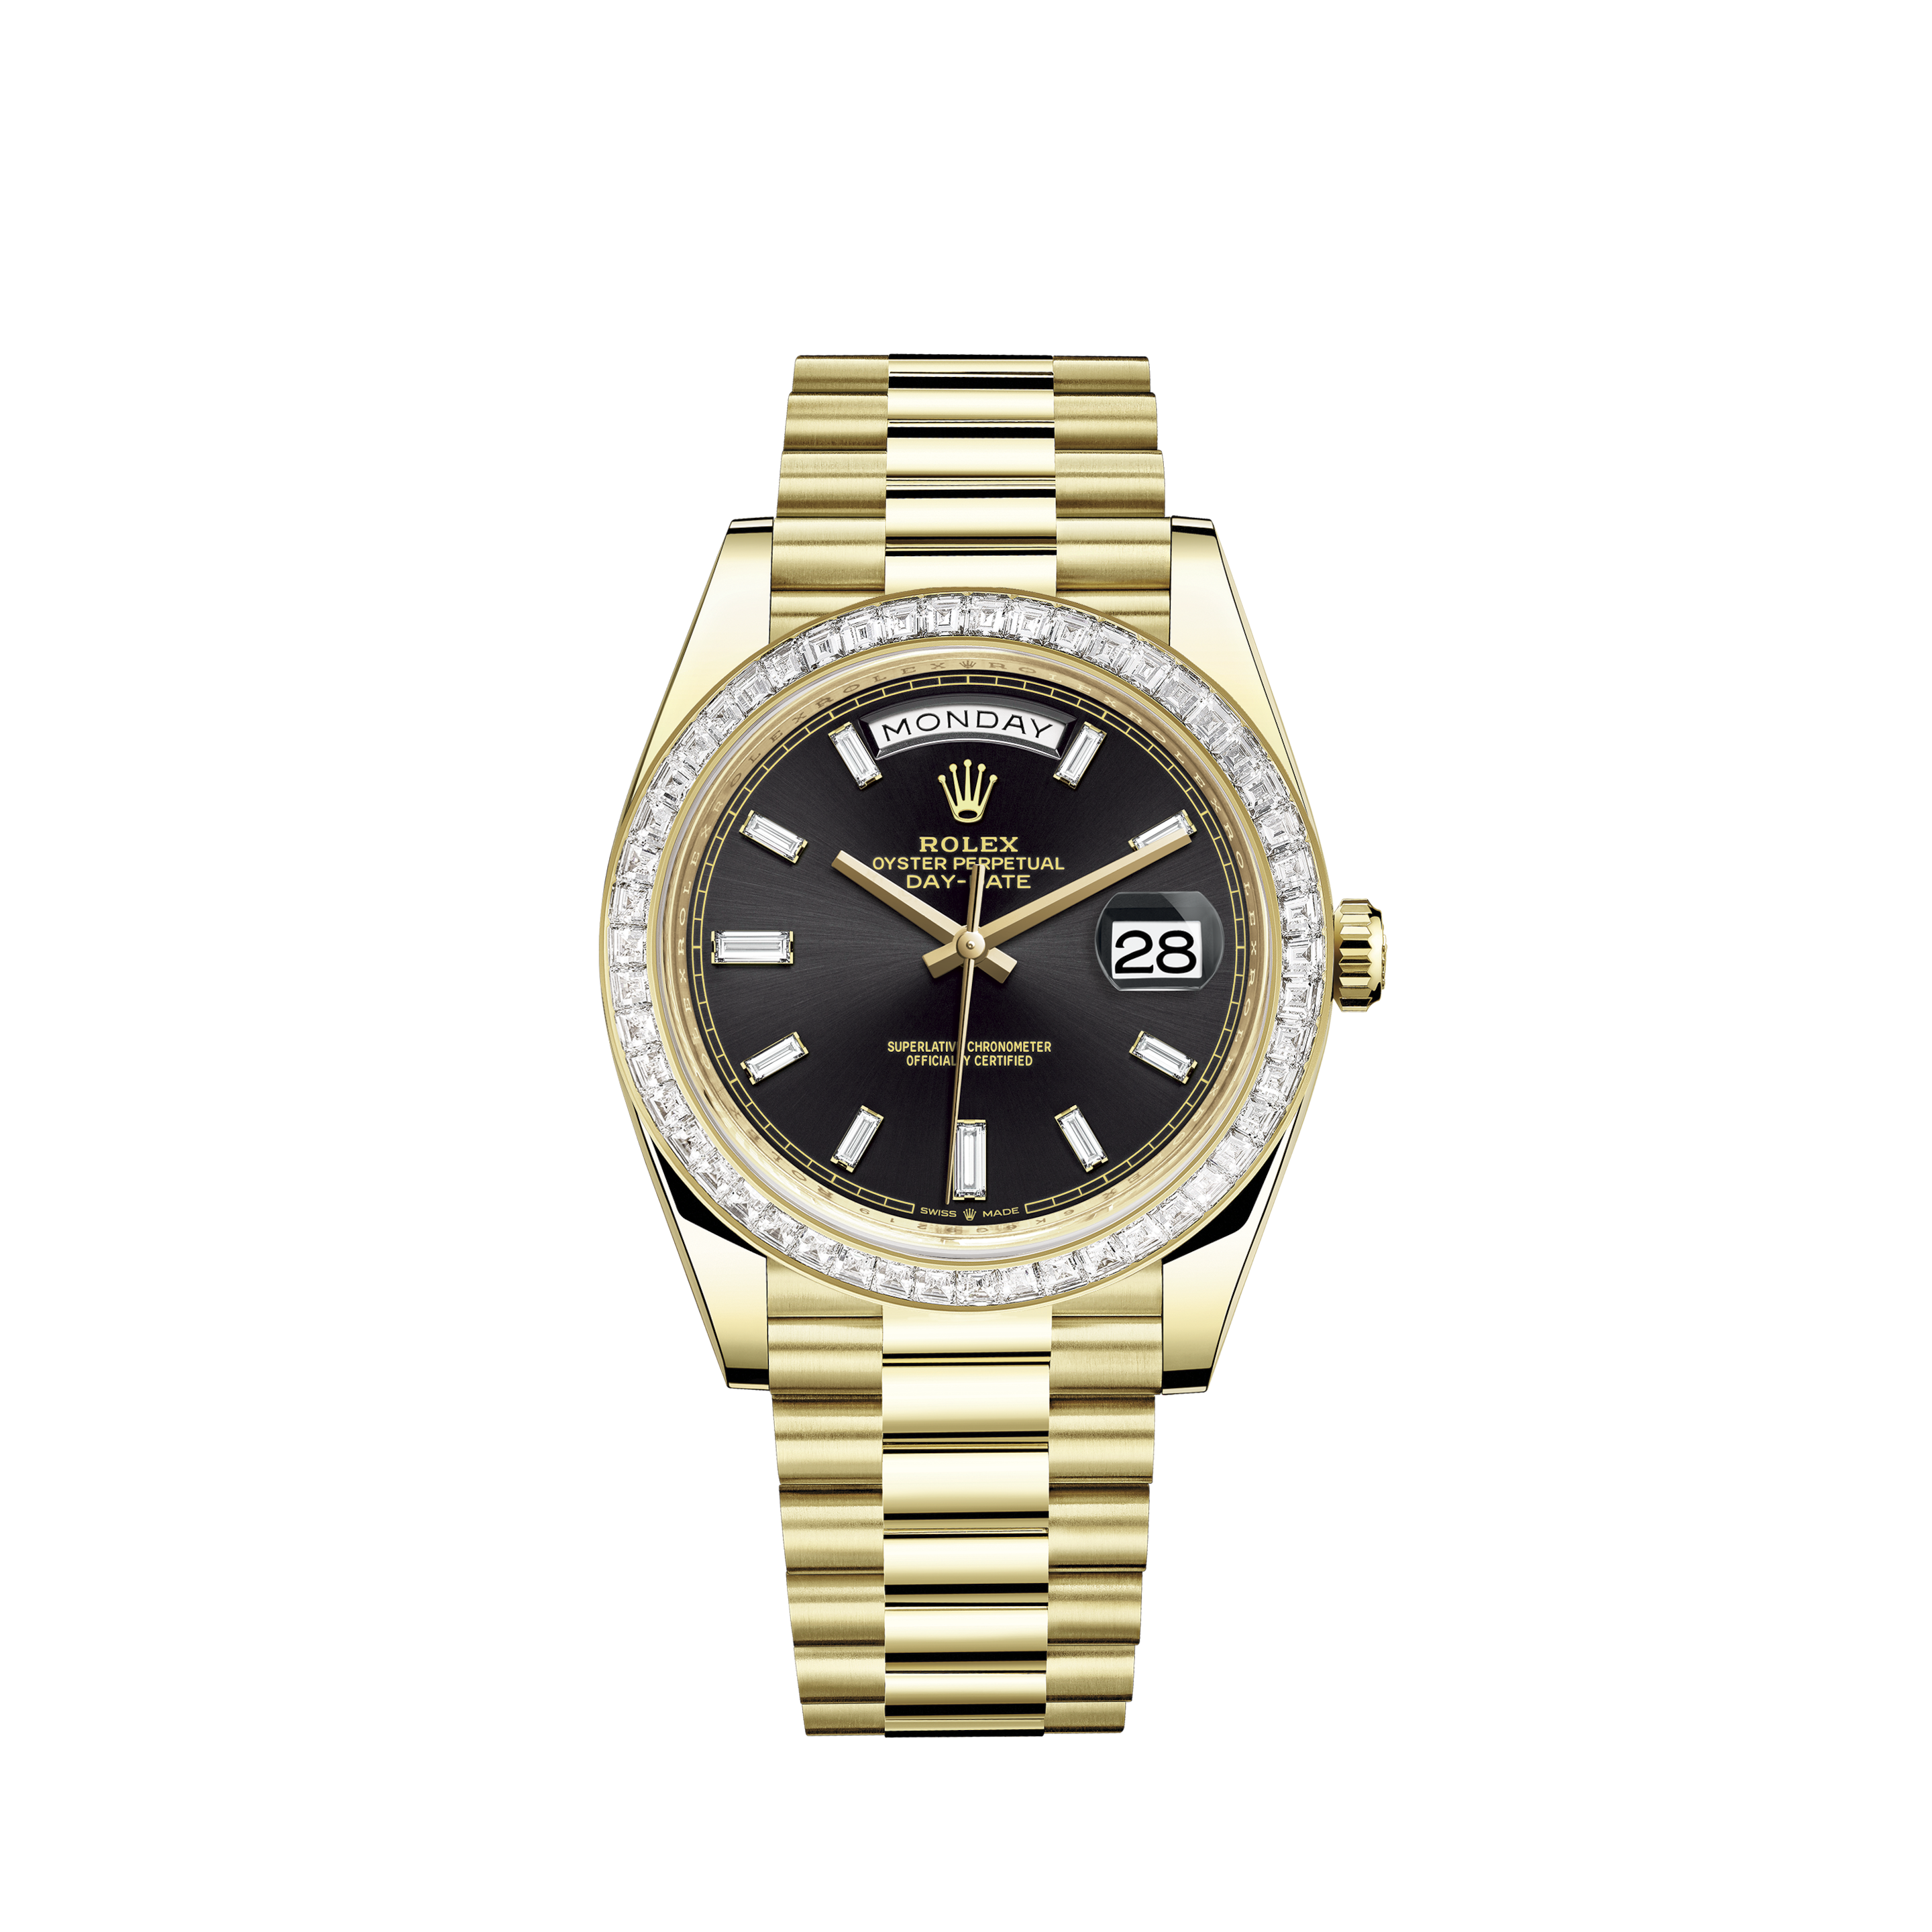 rolex oyster perpetual day date gold with diamonds price